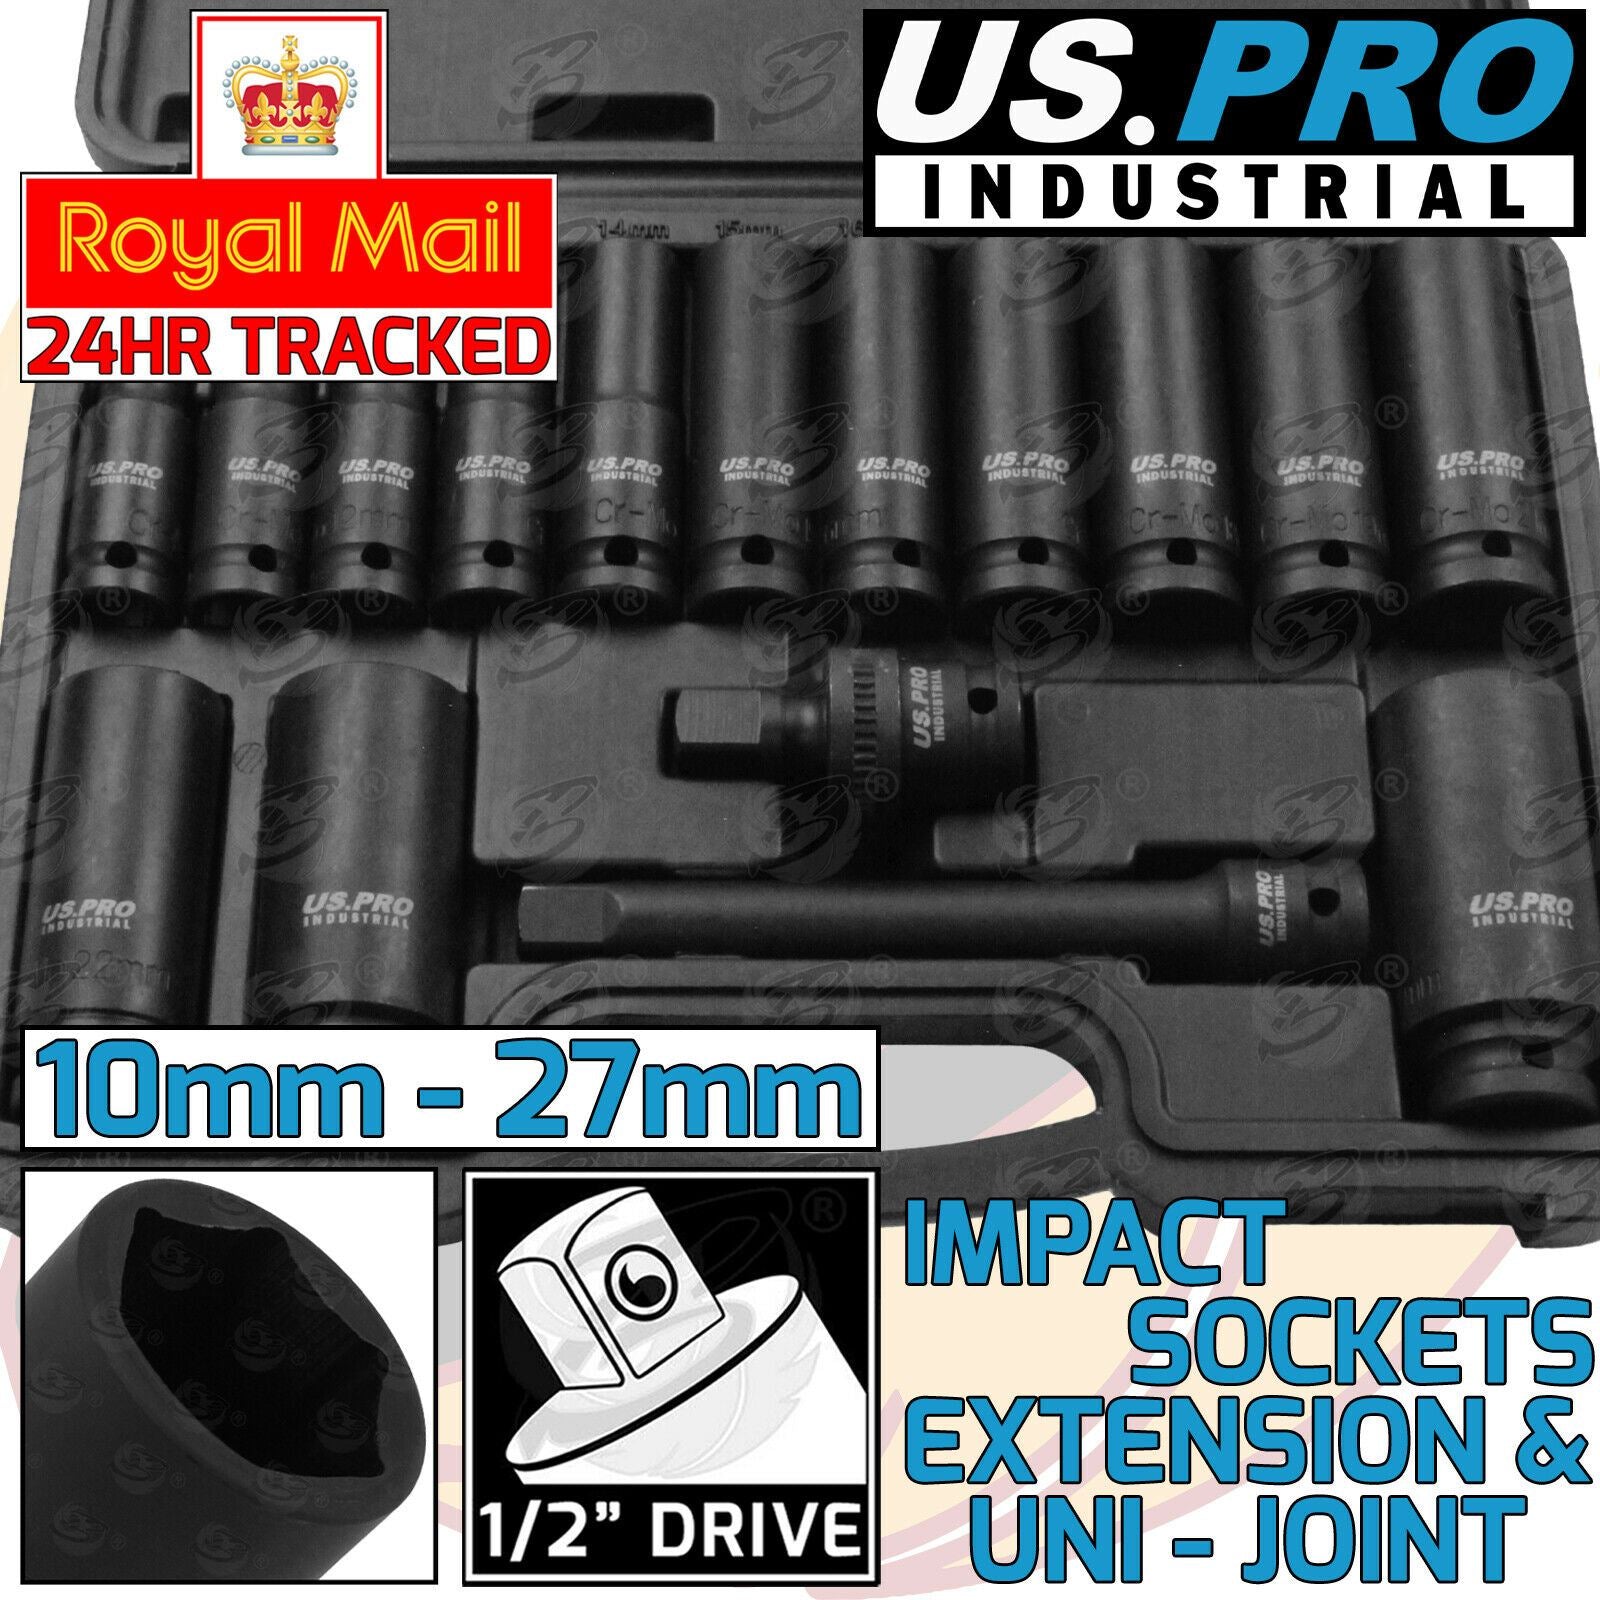 US PRO INDUSTRIAL 16PCS 1/2" DRIVE 6 POINT DEEP IMPACT SOCKETS & EXTENSIONS 10MM - 27MM